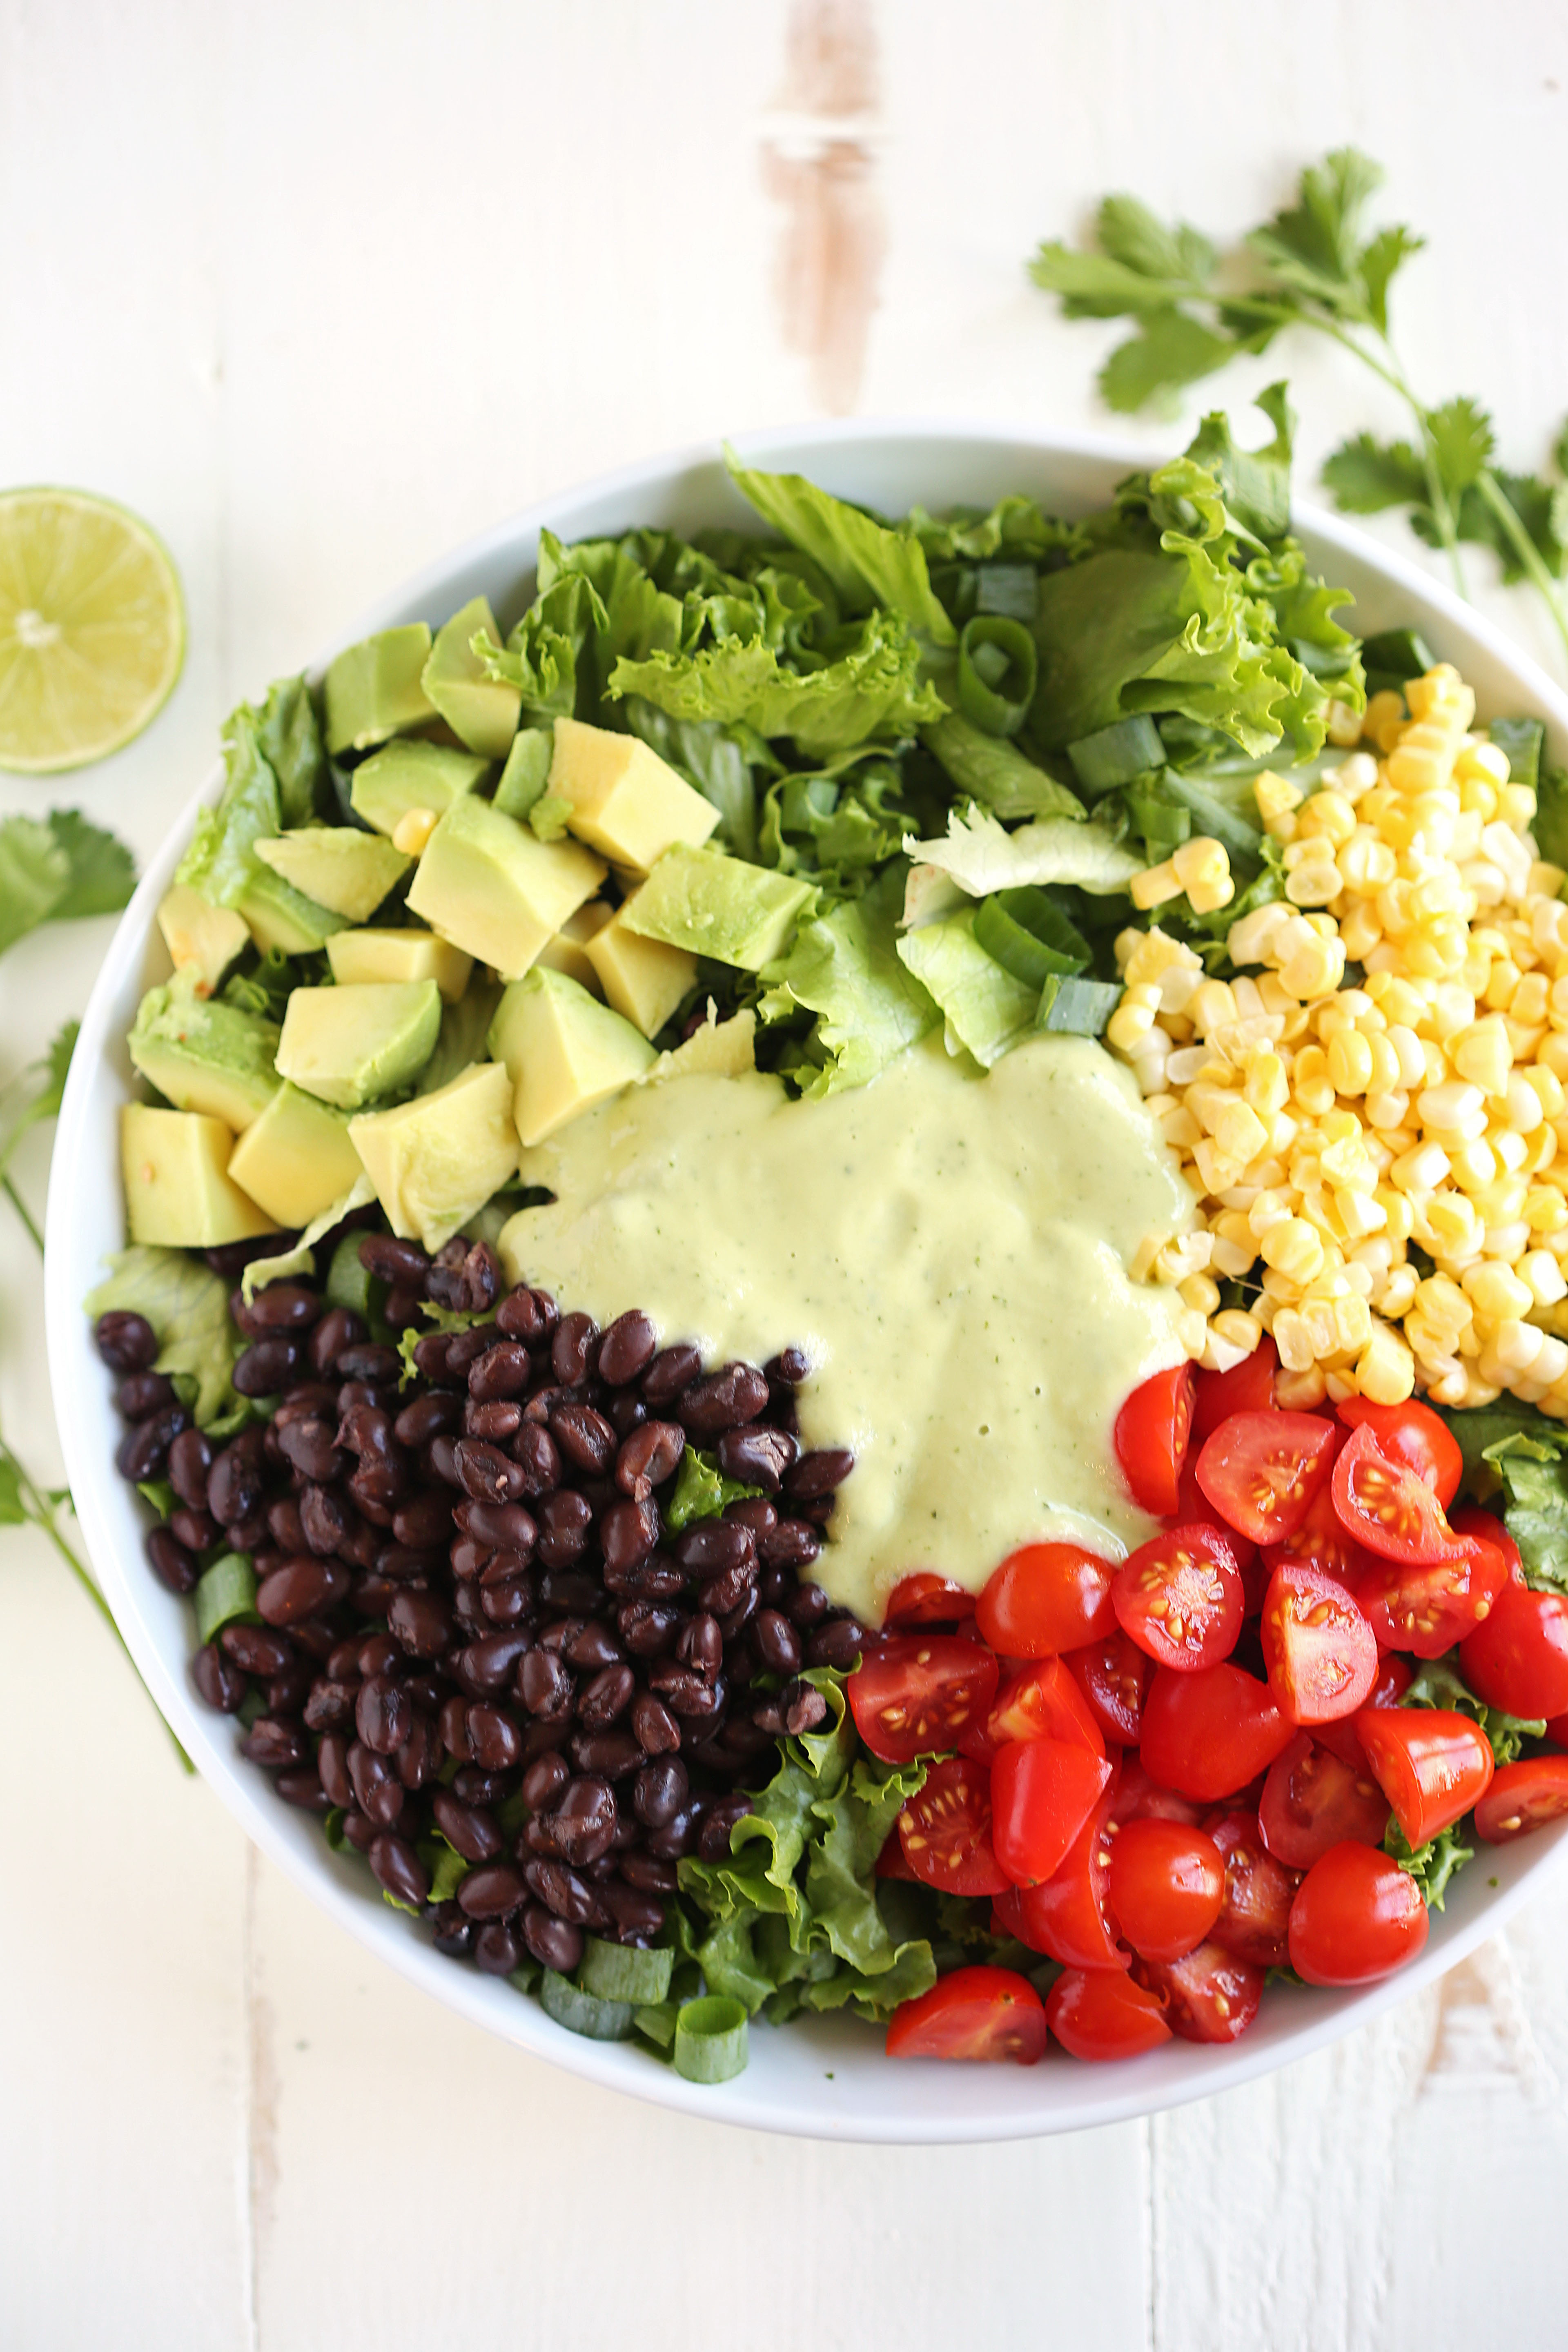 This Southwestern Salad with Creamy Avocado dressing is healthy, crunchy and loaded with tons of veggies!